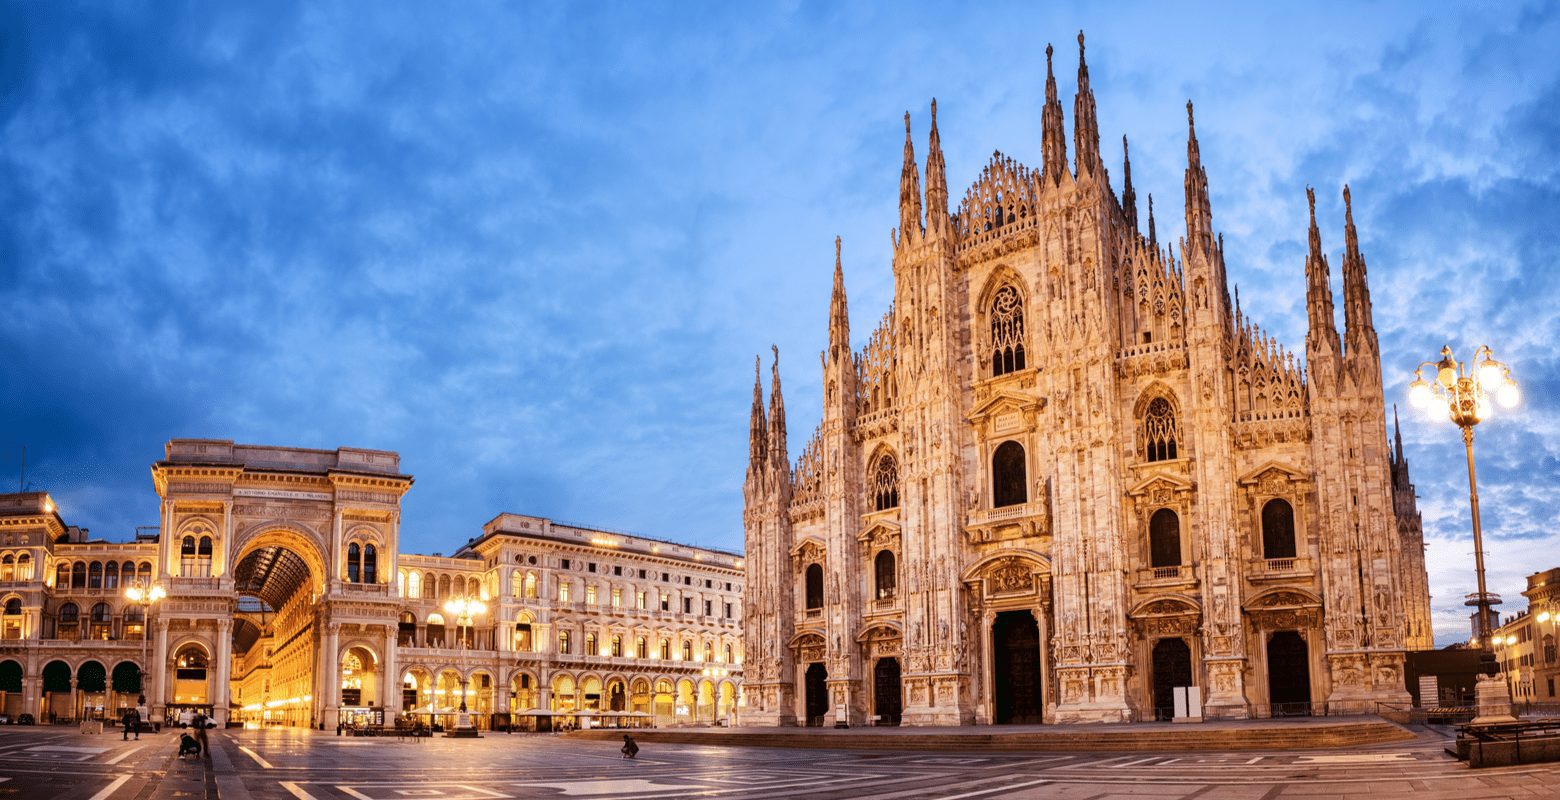 For a piece on where to stay in Milan, a photo of the Milan Cathedral towering over the city below